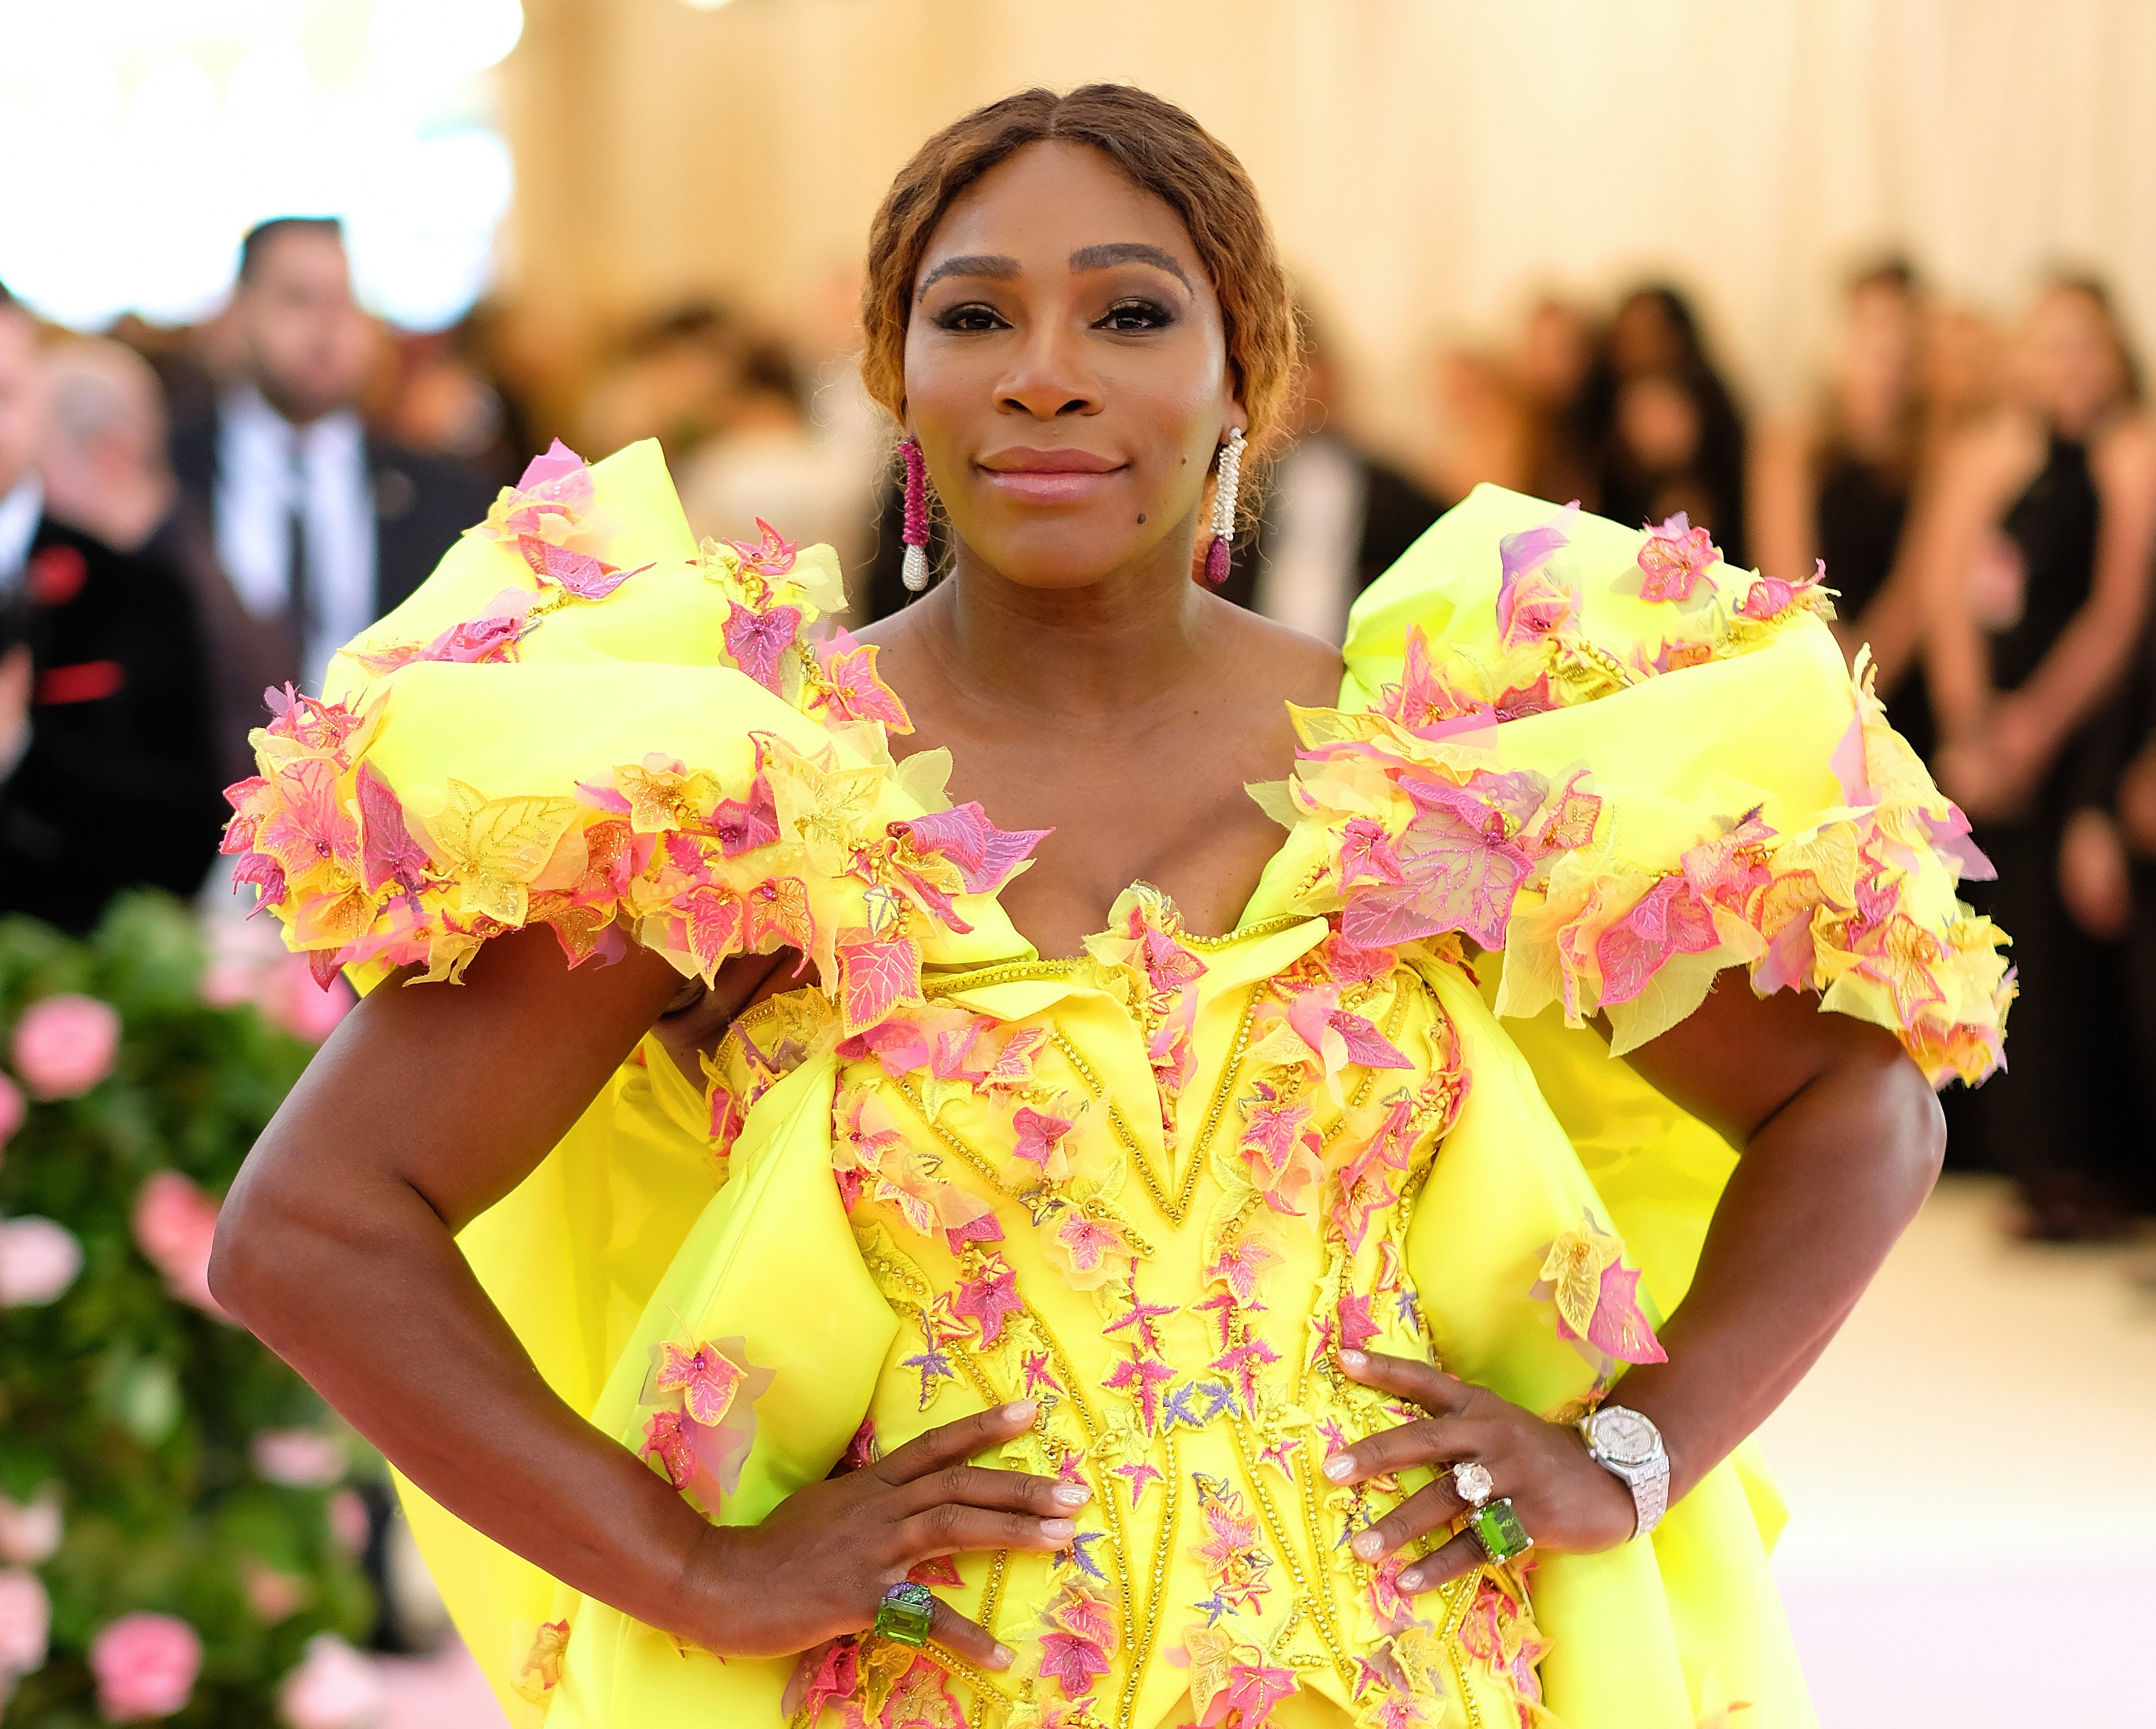 Serena Williams attends The 2019 Met Gala Celebrating Camp: Notes on Fashion at Metropolitan Museum of Art on May 06, 2019 in New York City | Photo: Getty Images